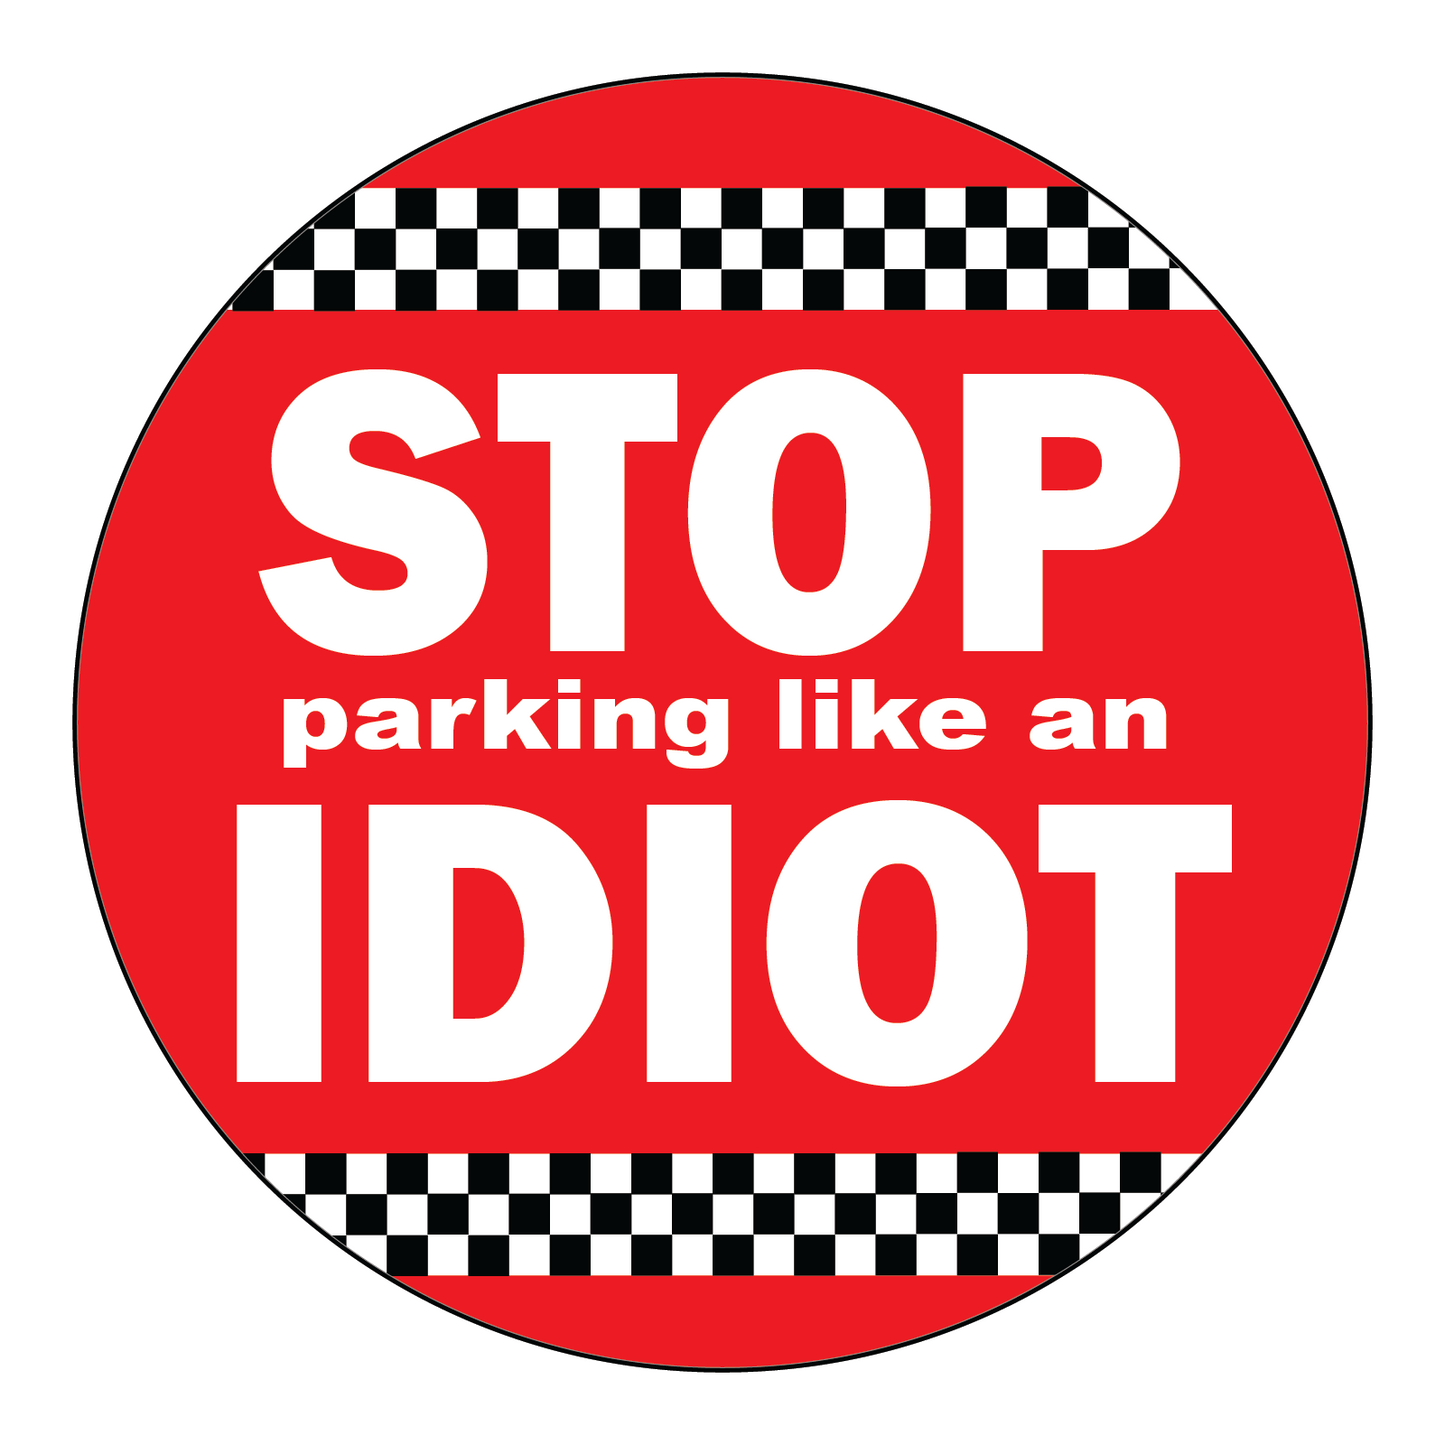 8 x LARGE Parking Like An Idiot Stickers